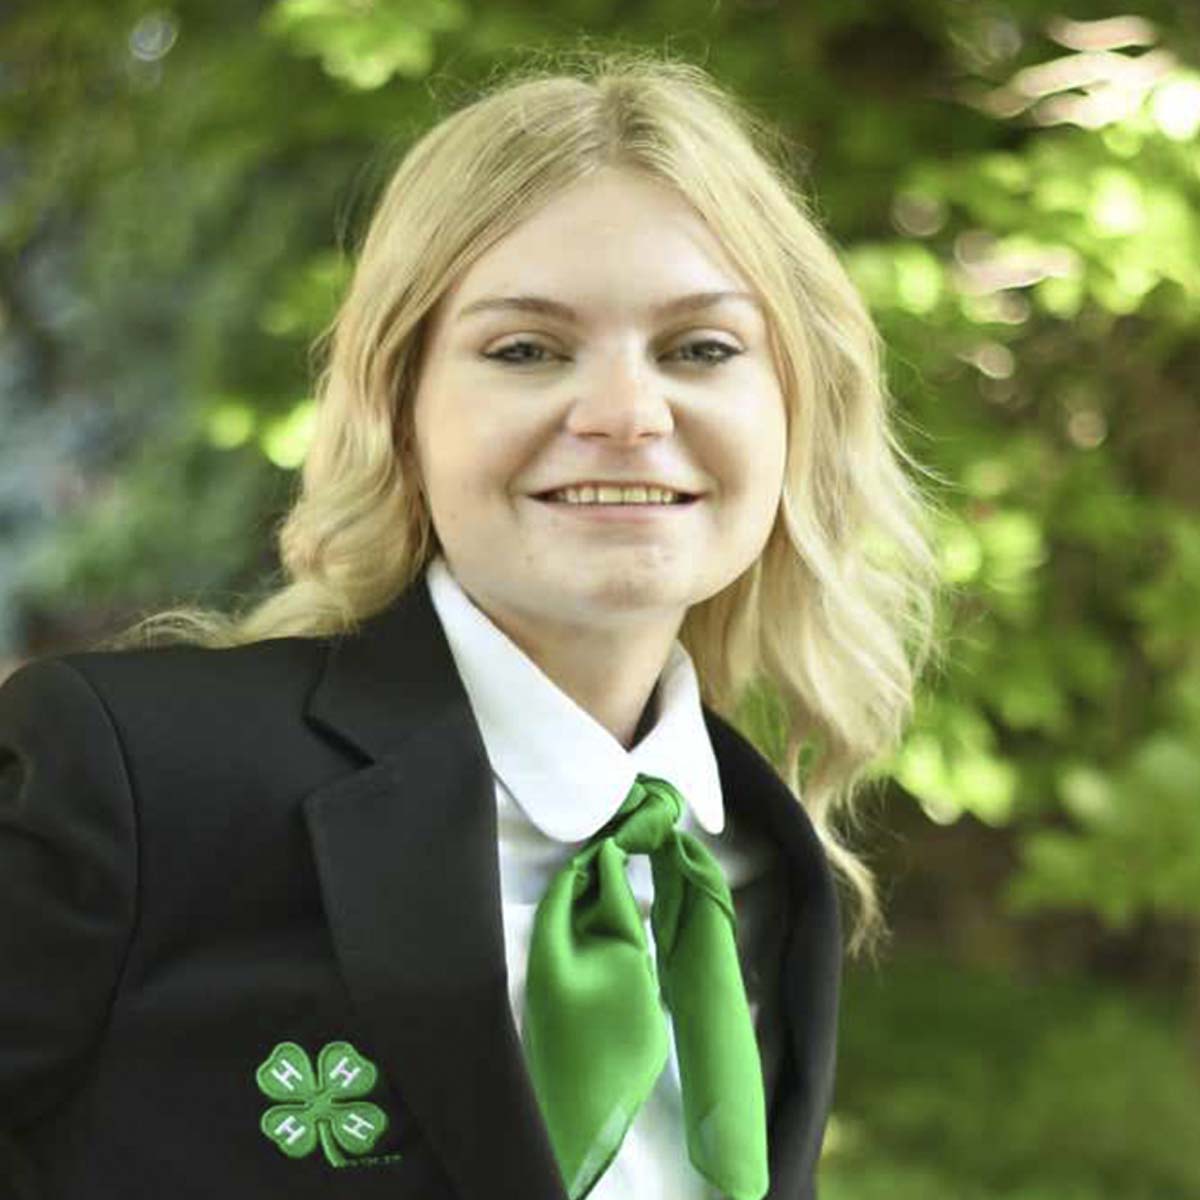 Portrait of a female in 4-H clothing.